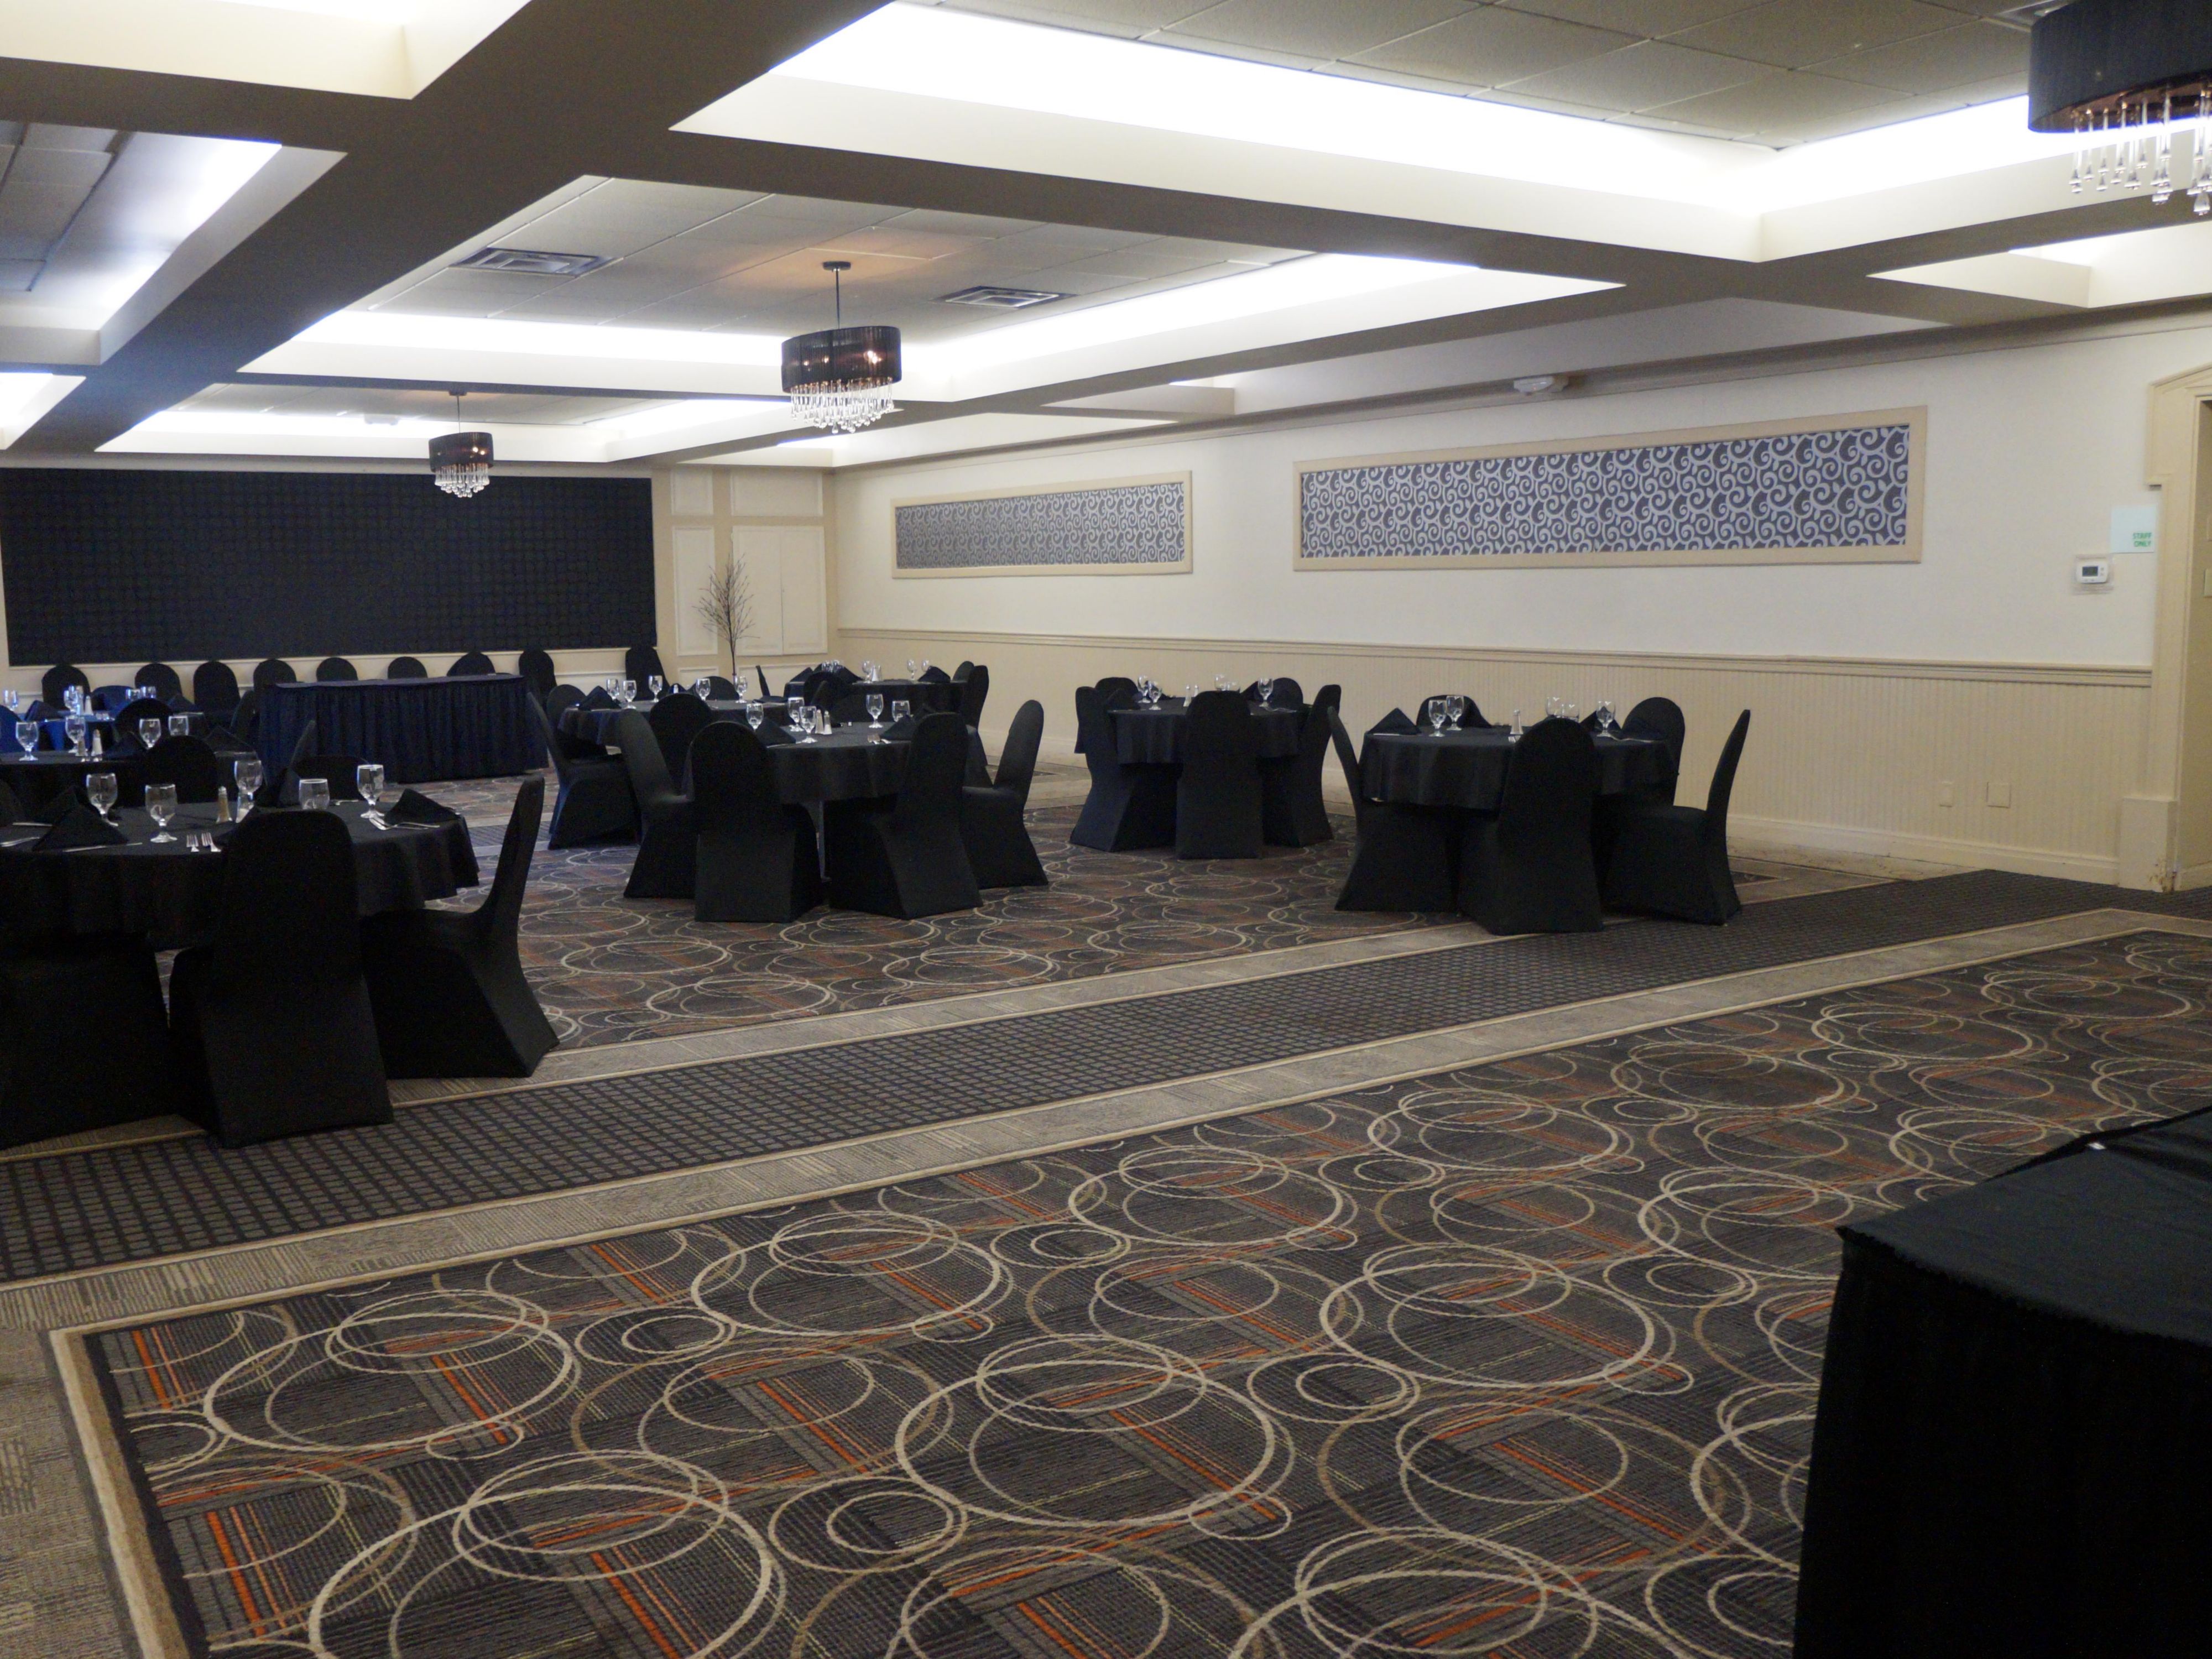 Whether it's for a business meeting or an elegantly decorated wedding, we have the venue for you.